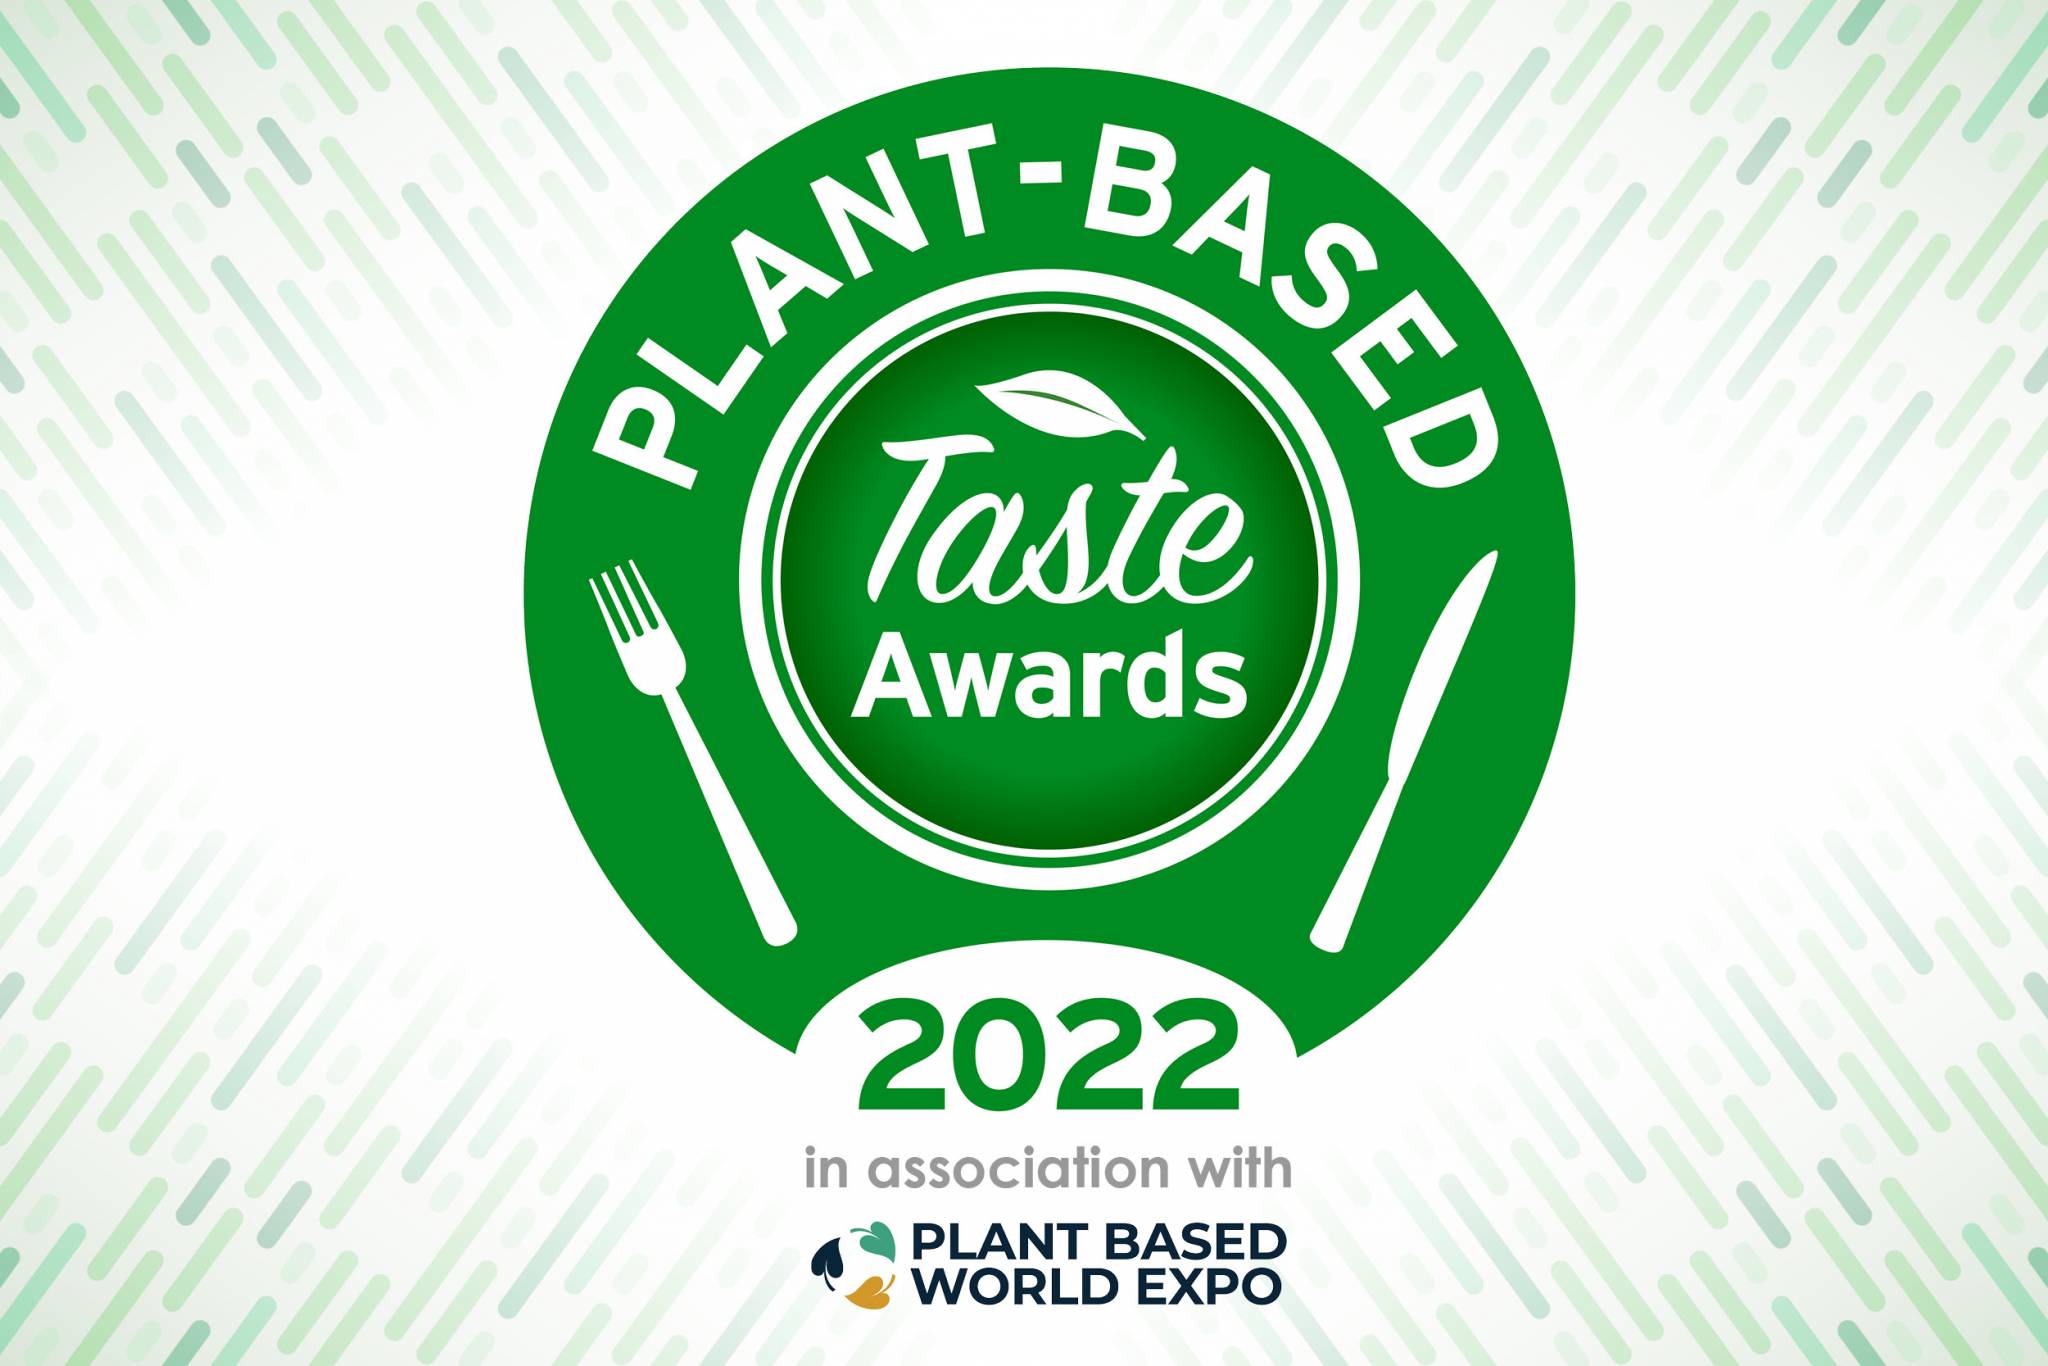 Plant-Based Taste Awards 2022: Finalists announced